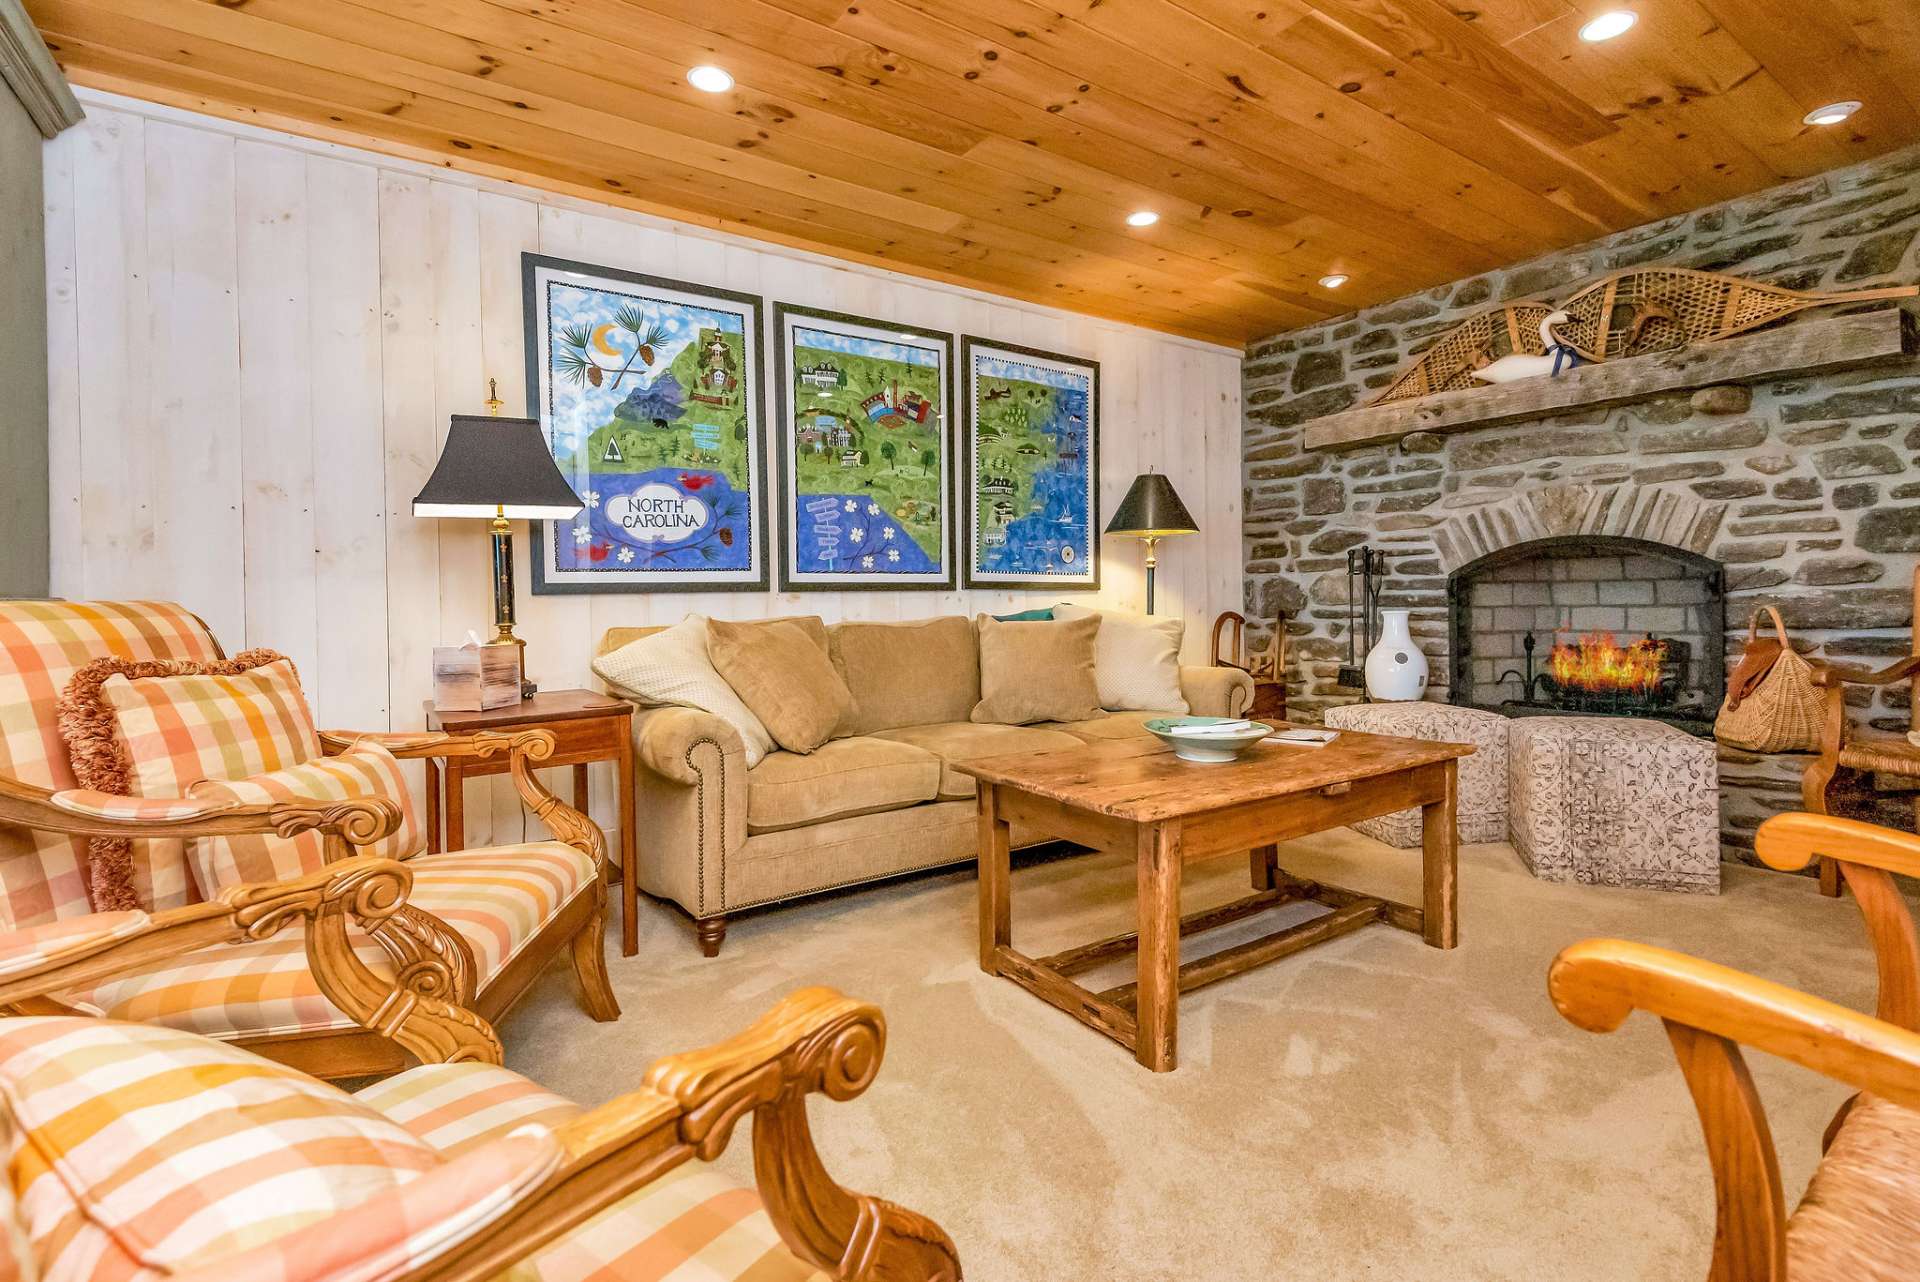 The lower level provides yet another family room which, of course, features another stone fireplace, this one with gas logs.